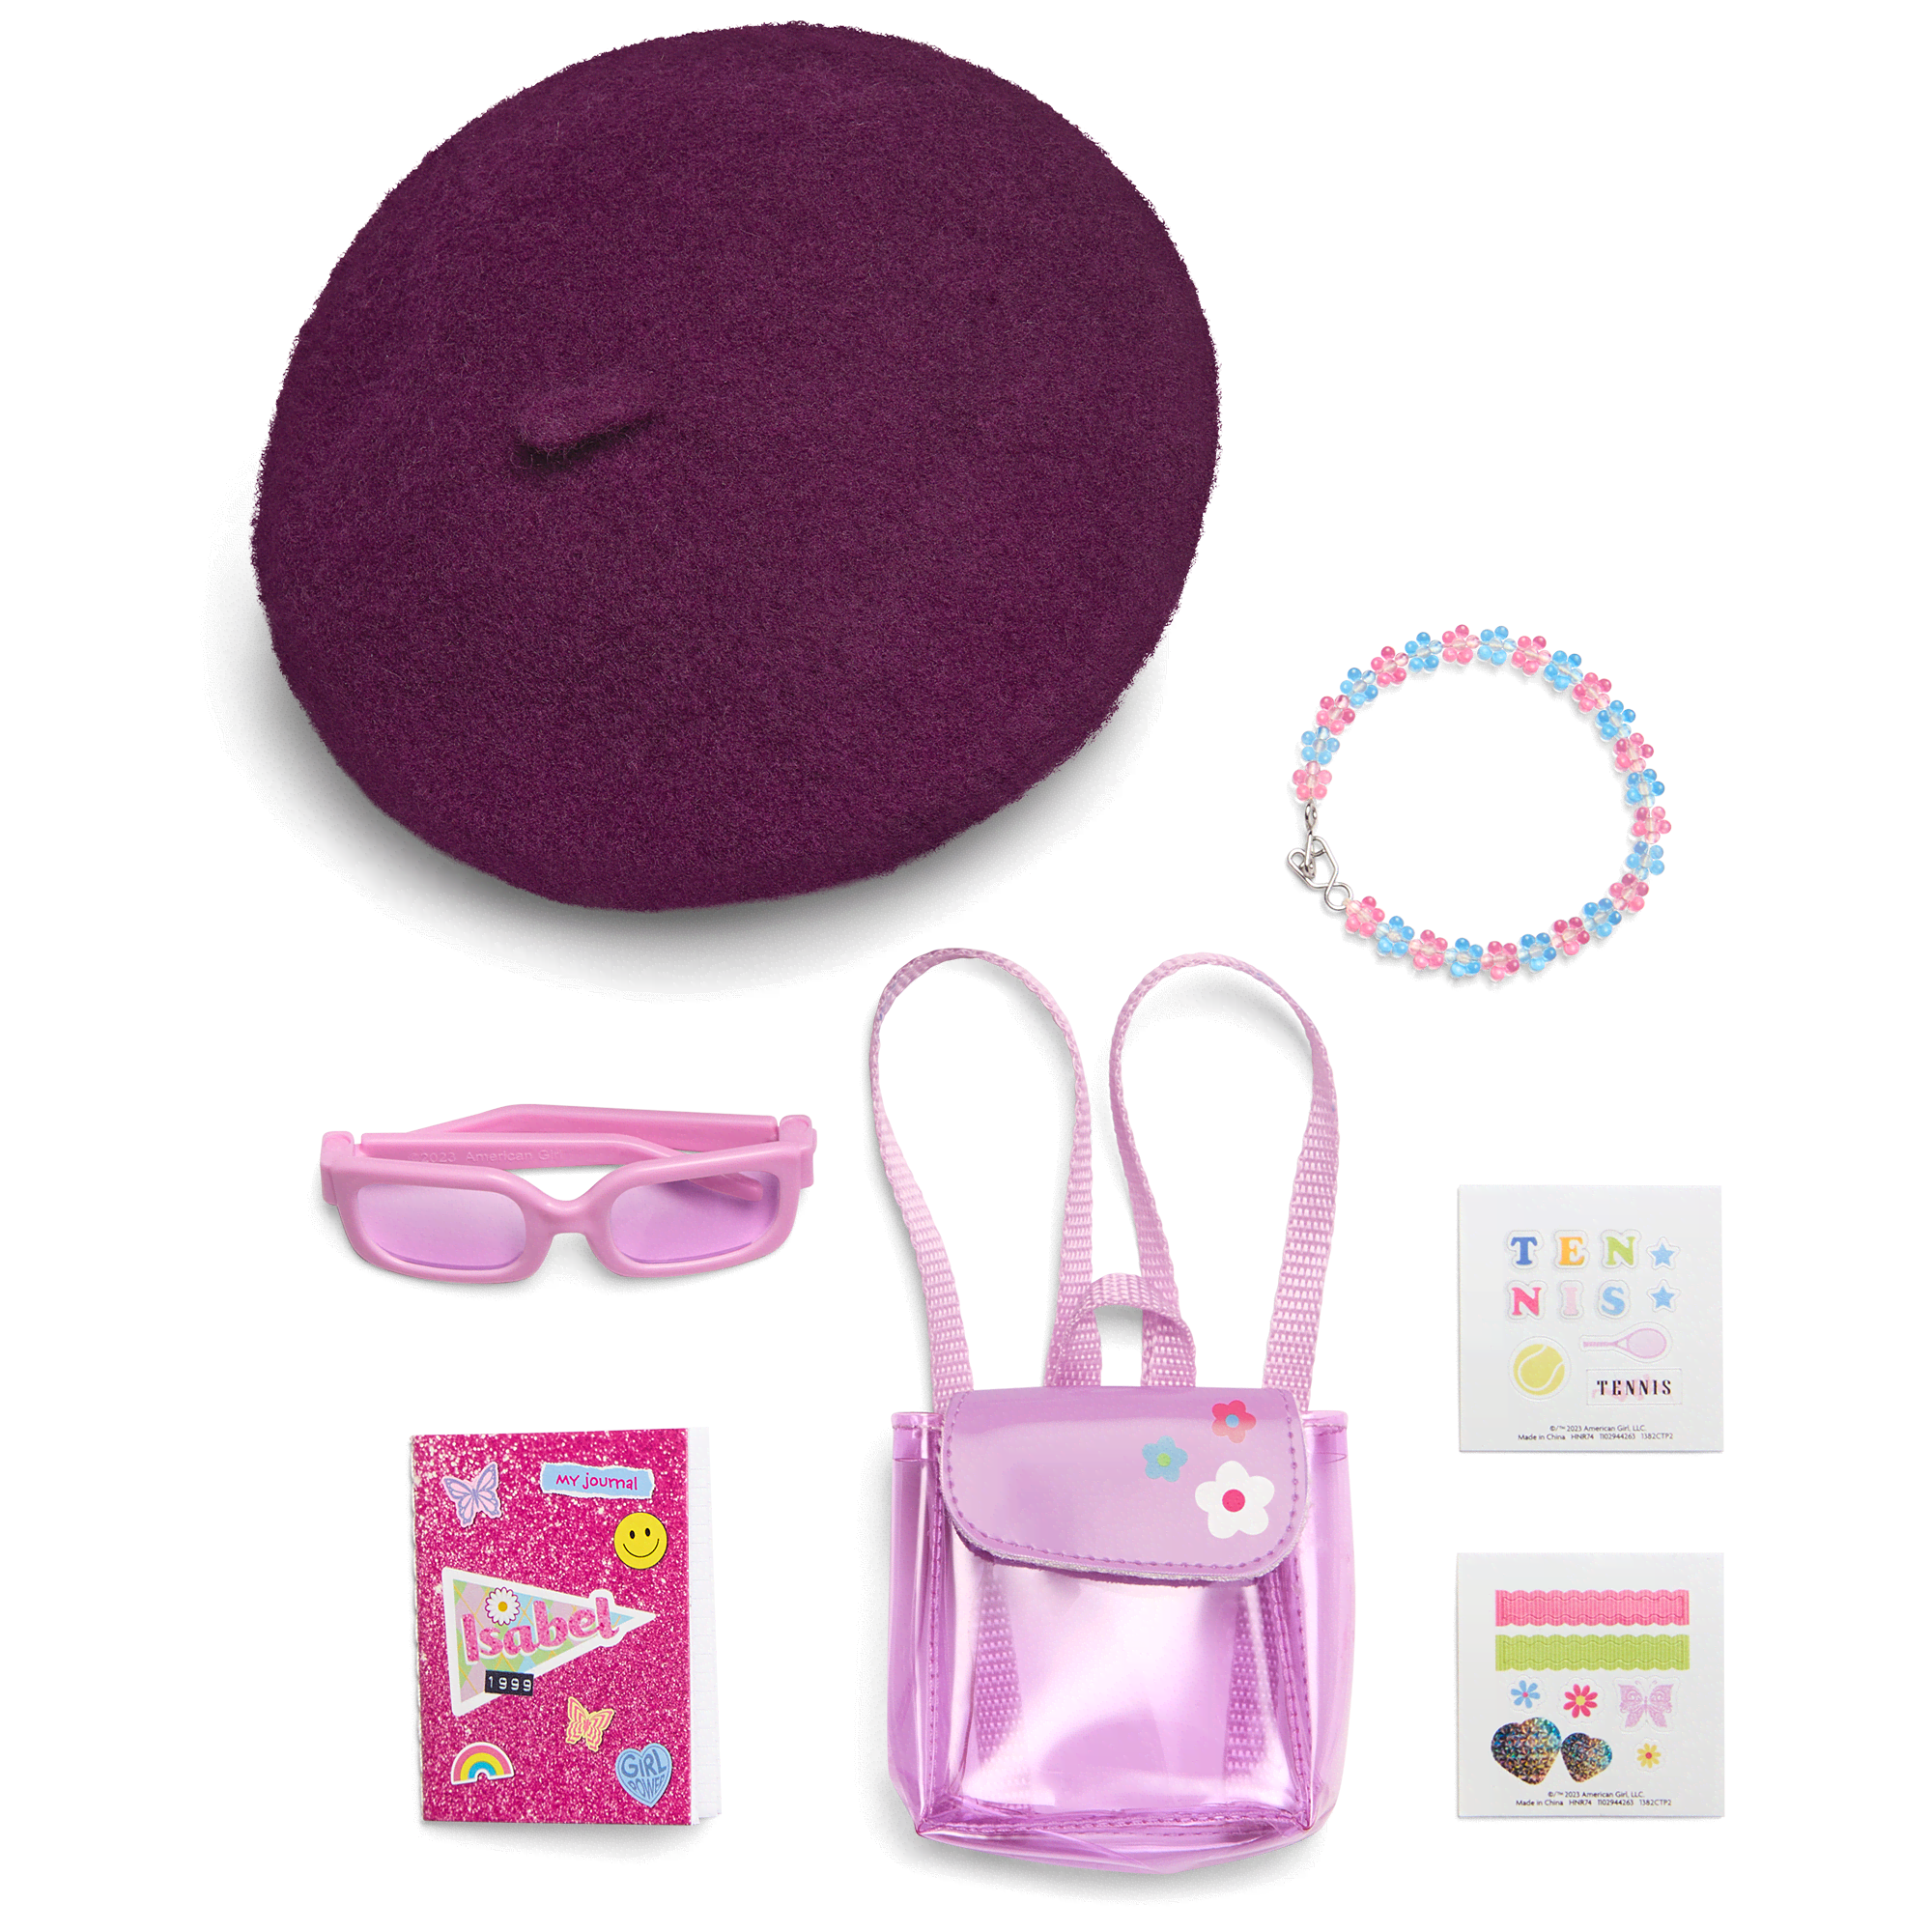 ’90s Twins Isabel™ & Nicki™ Gift Set (Historical Characters)